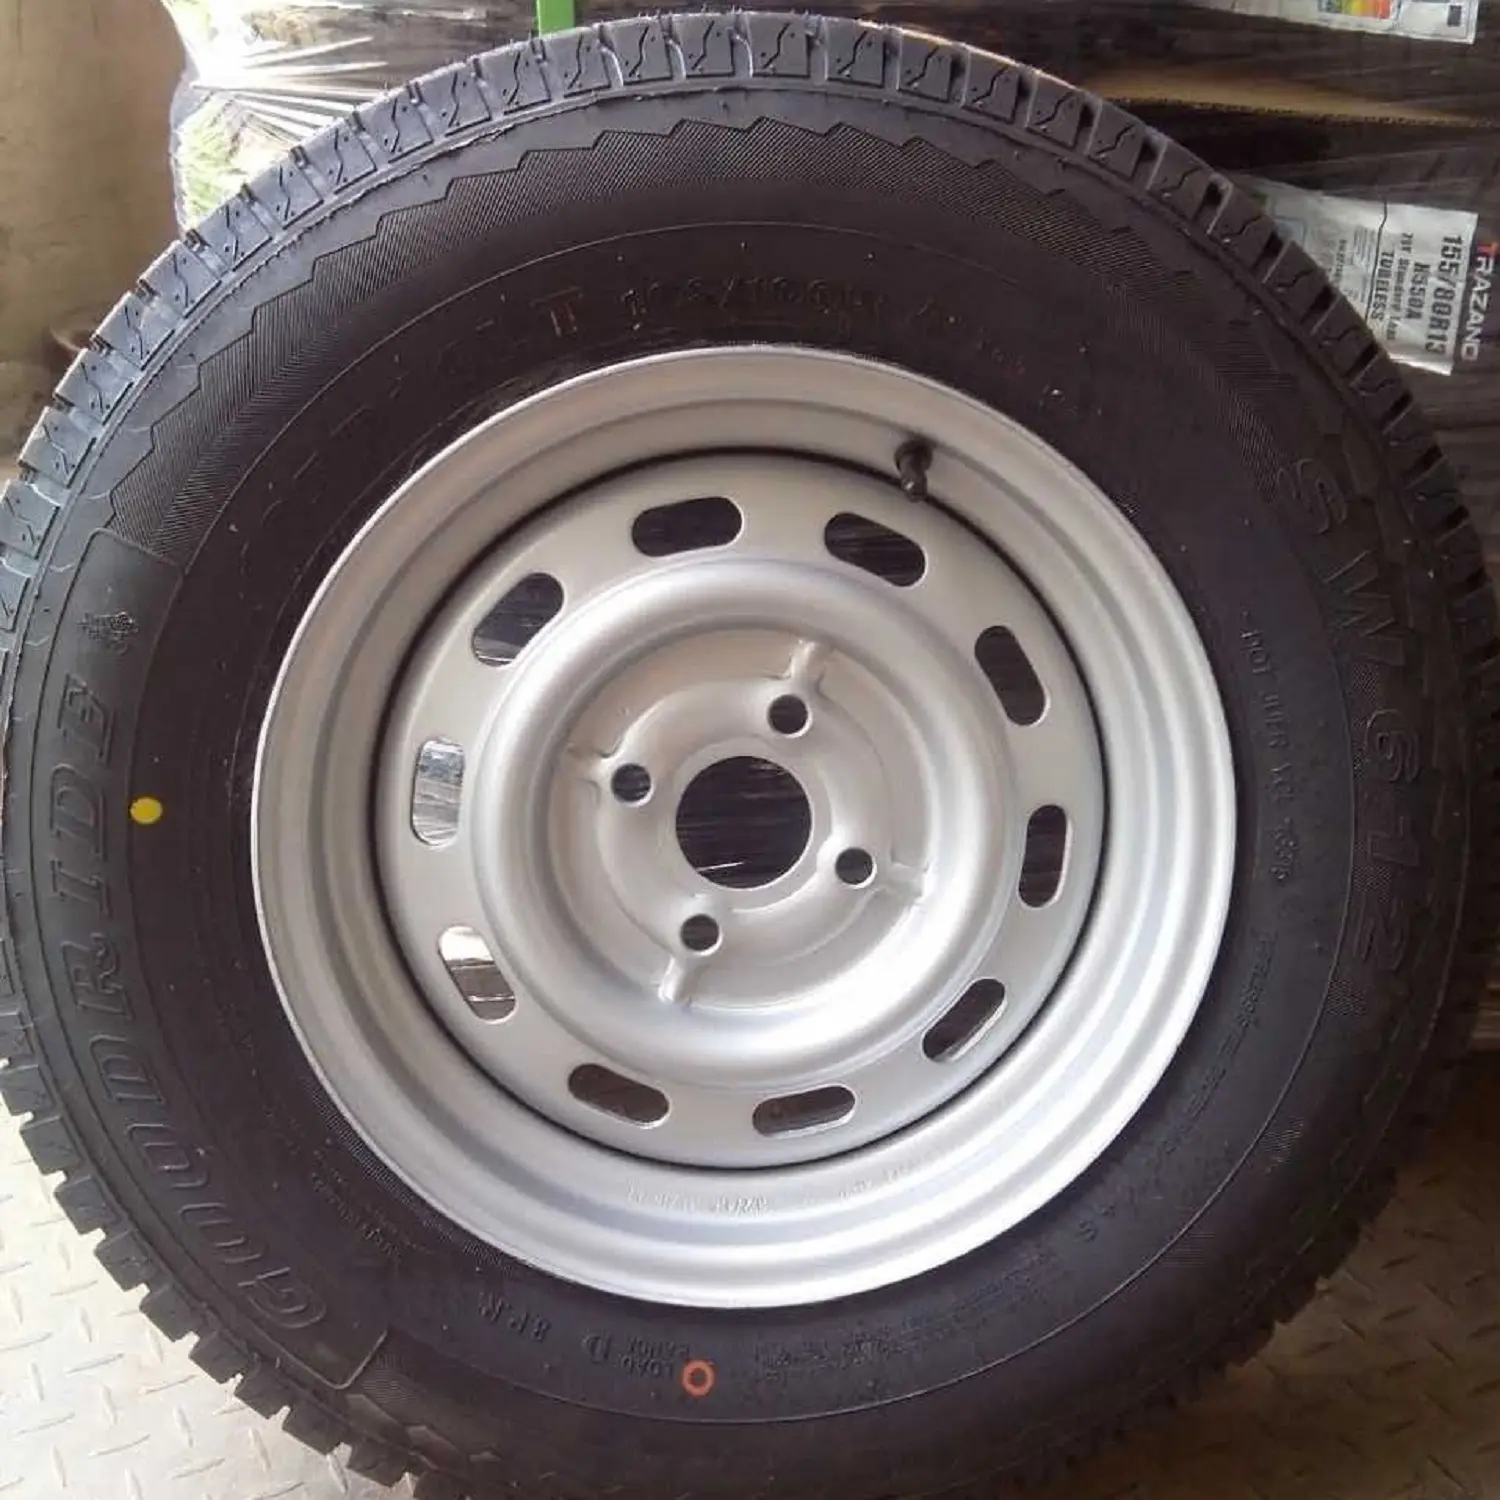 A6135 100% Cheap Used tires and Second Hand Tyres Used Truck tires for Sale at Low Prices in Bulk